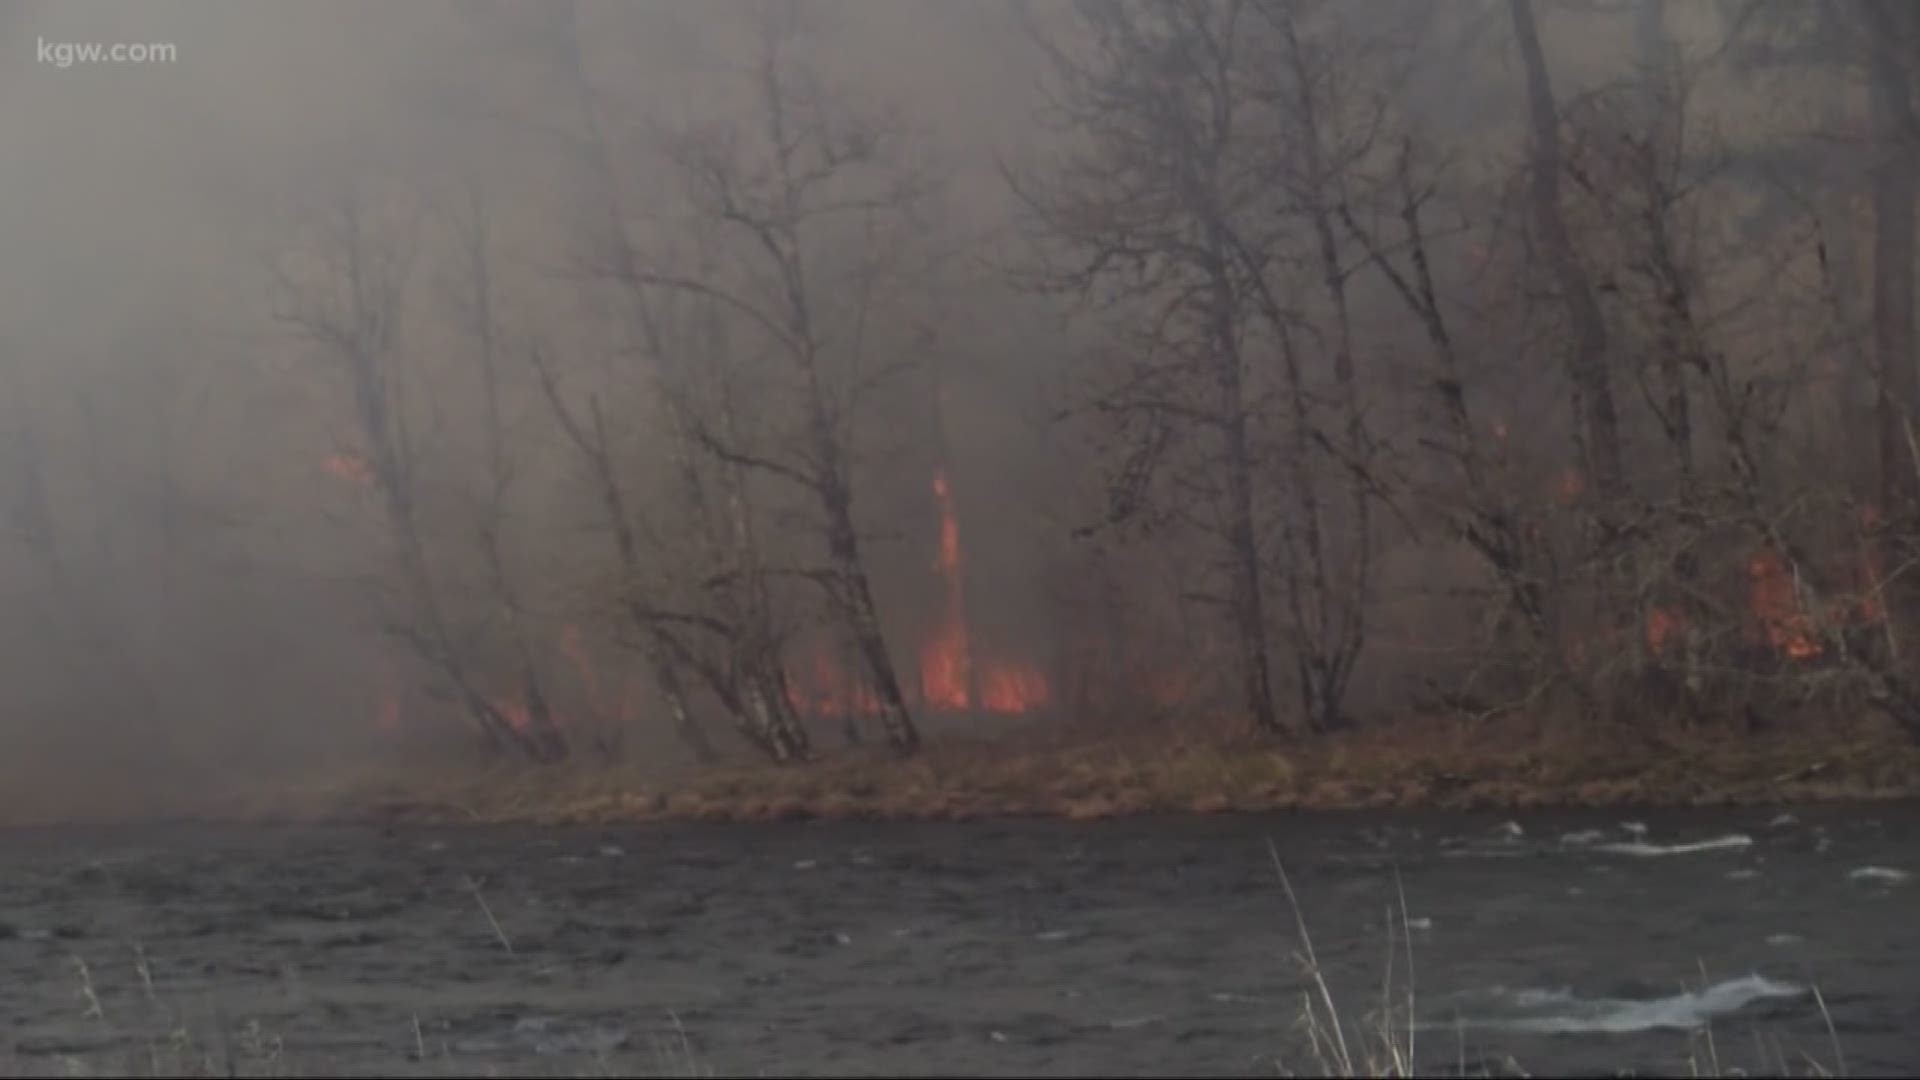 The Santiam Park Fire jumped the Santiam River about 30 miles southeast of Salem on Tuesday night, prompting Level 3 (Go) evacuation orders for nearby residents. By Wednesday morning the evacuation orders were reduced to Level 2 (Be Set).